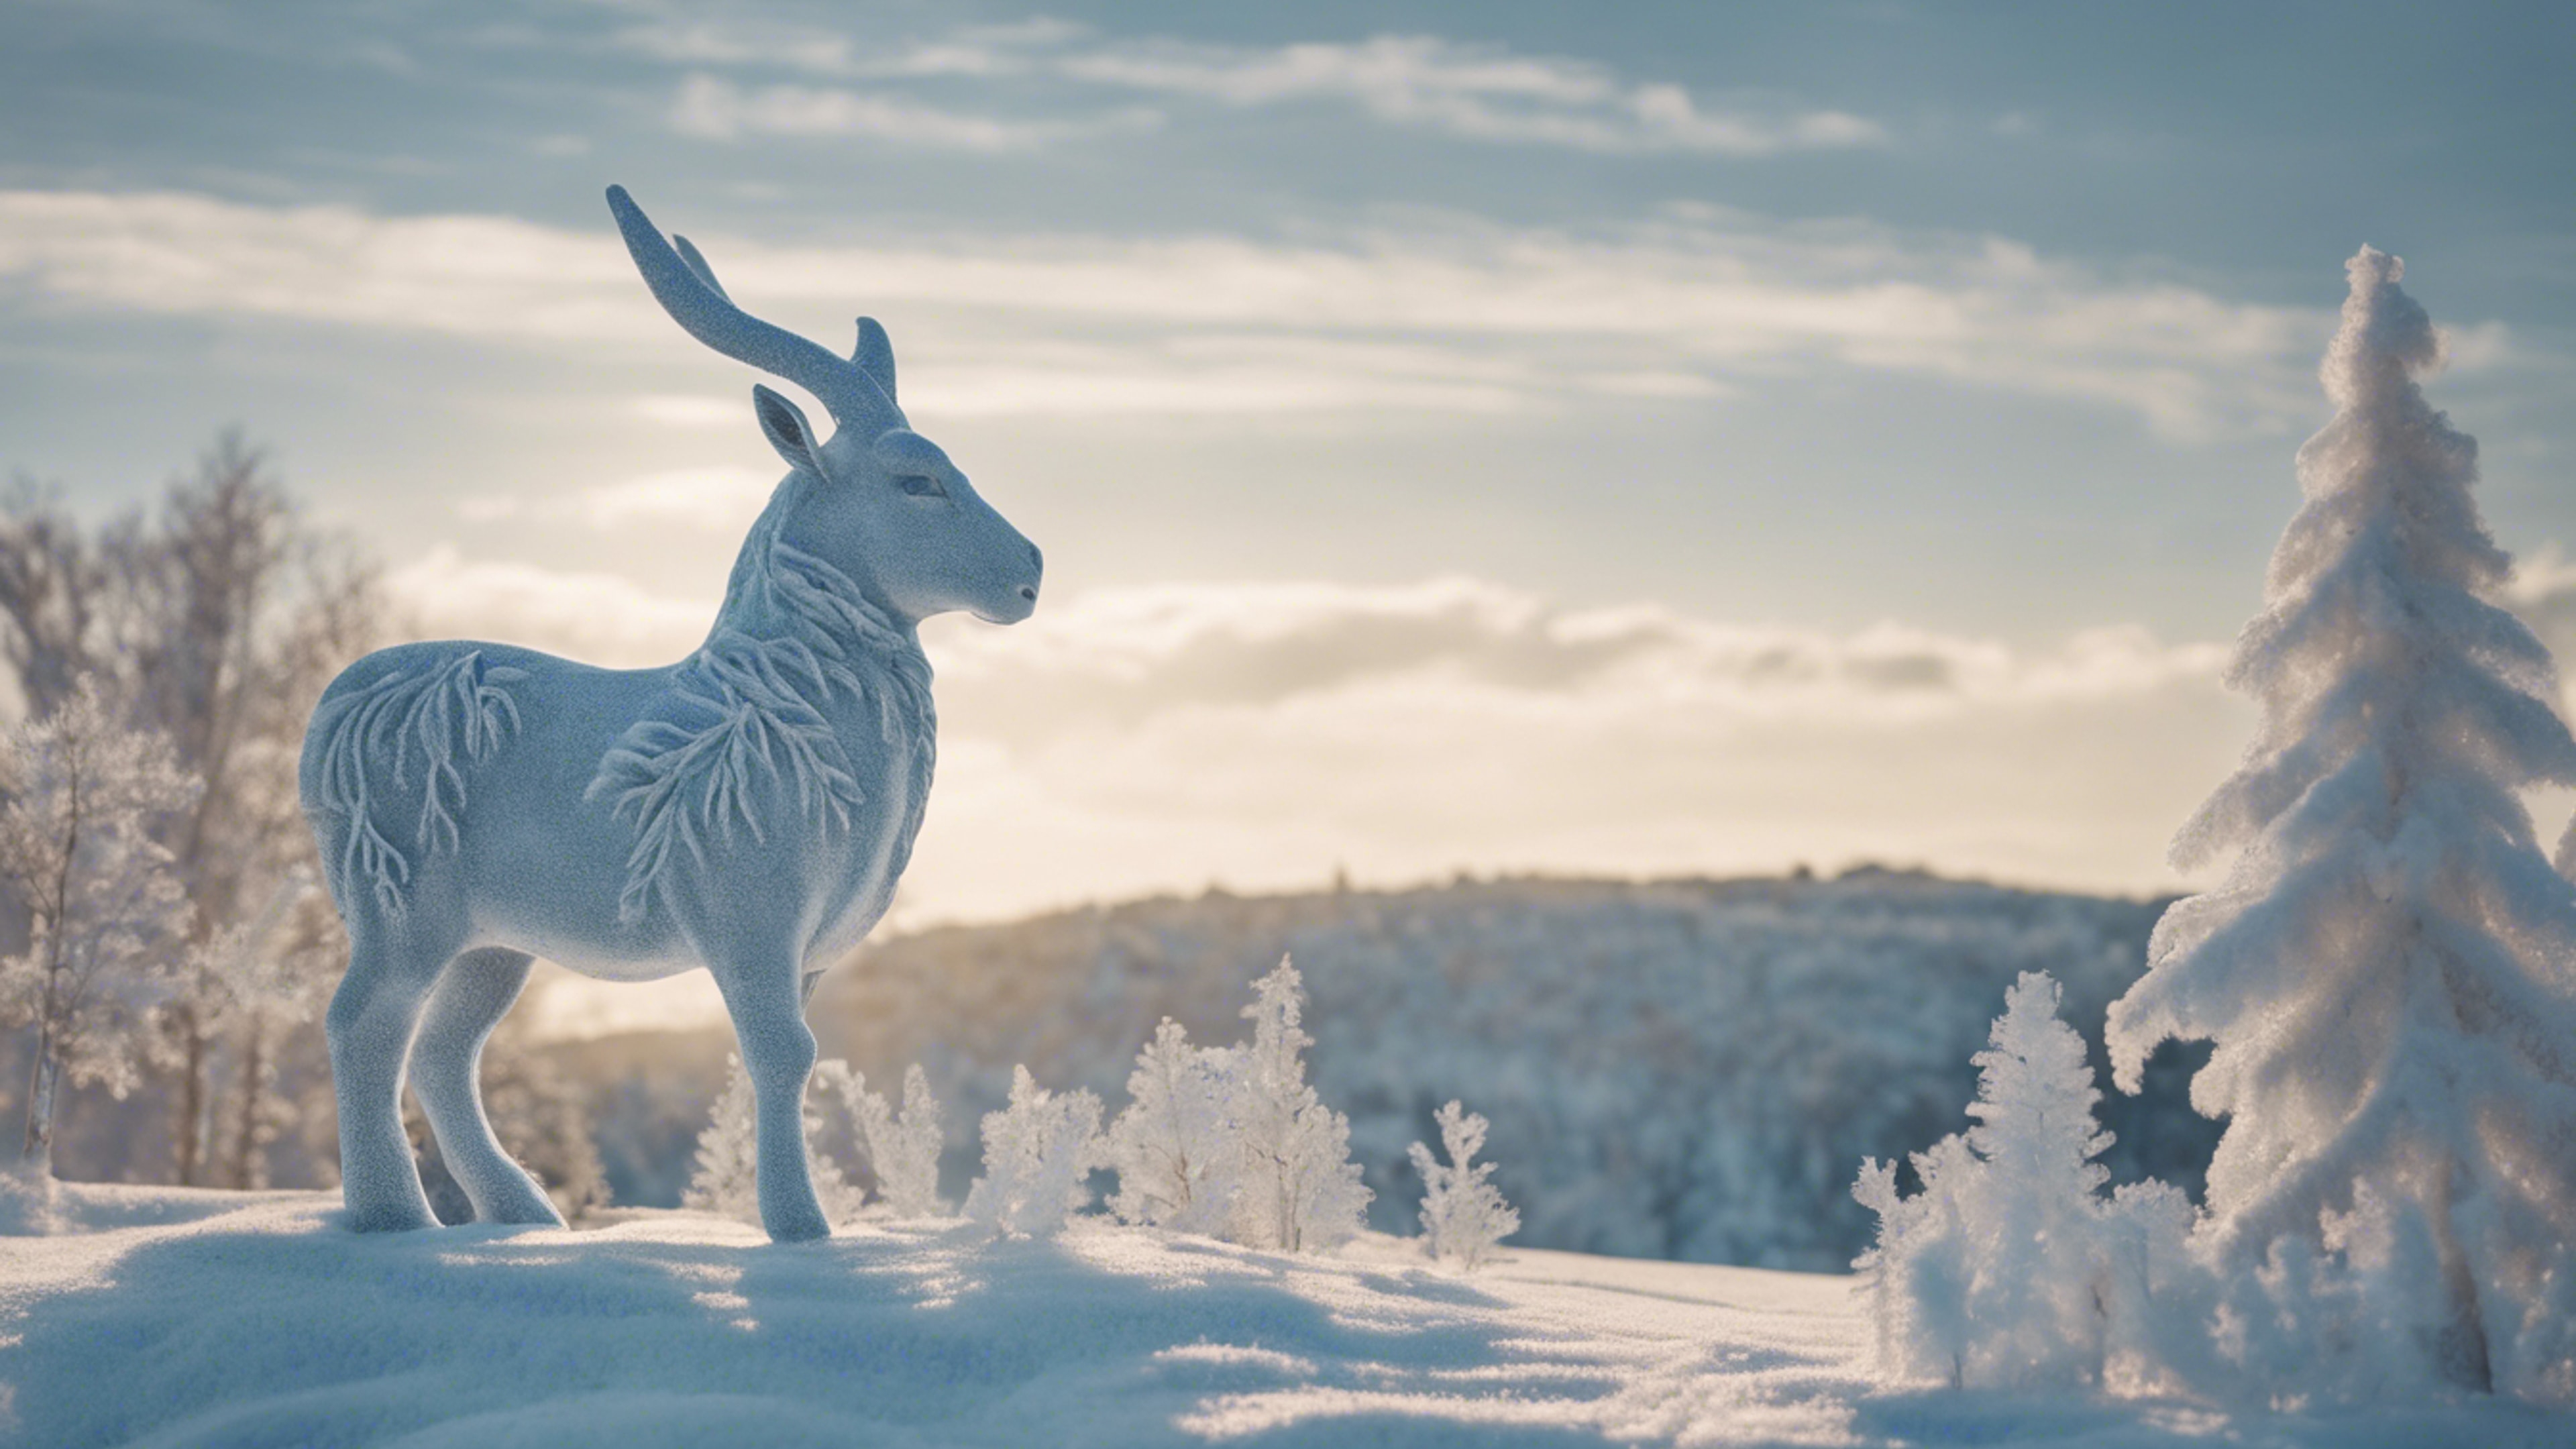 A frosty winter scene with a Capricorn carved out of snow.壁紙[482a740671ad4e9e8688]